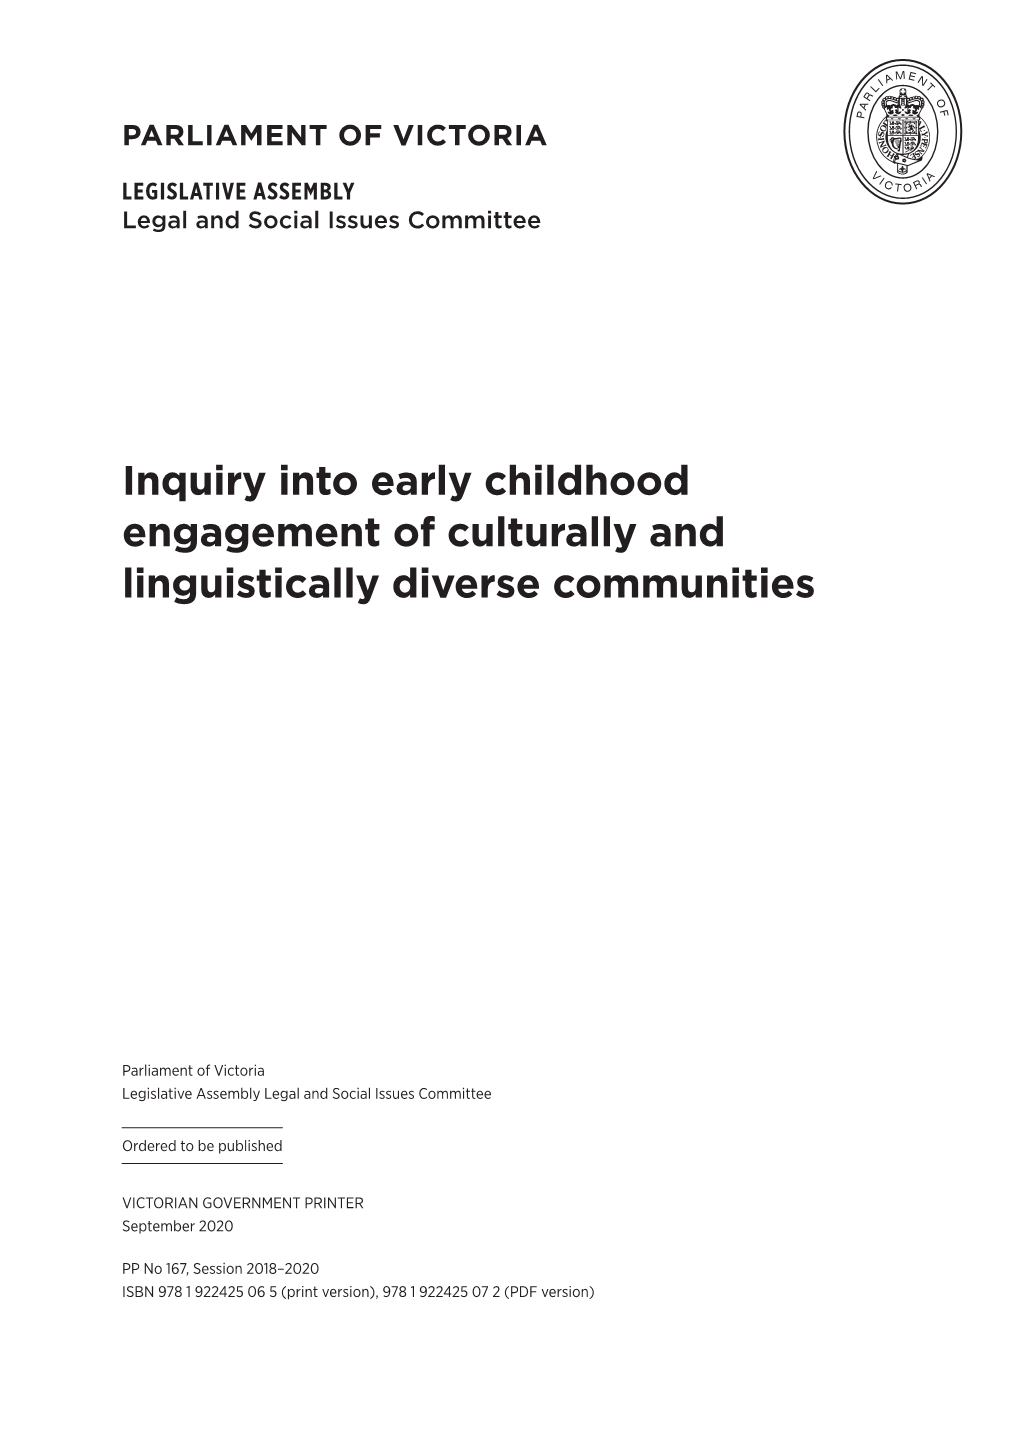 Inquiry Into Early Childhood Engagement of Culturally and Linguistically Diverse Communities